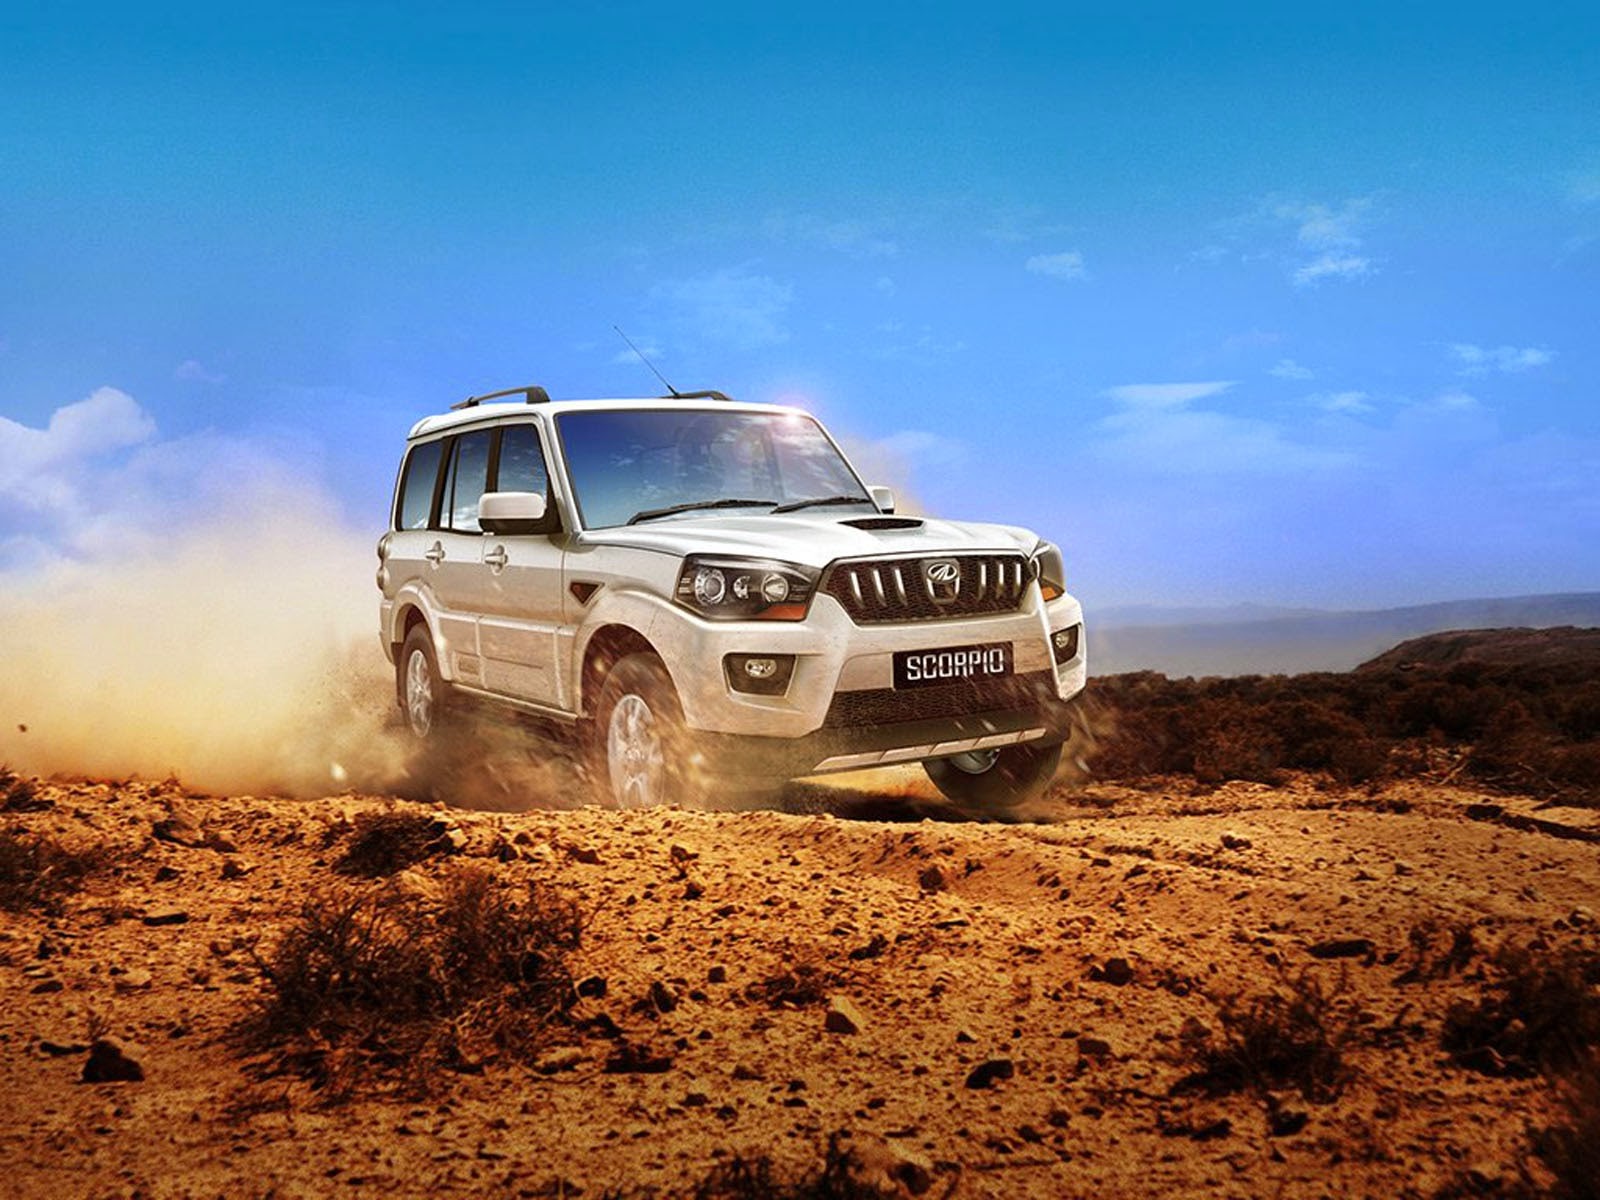 We can't stop staring either. Image... - Mahindra Scorpio | Facebook